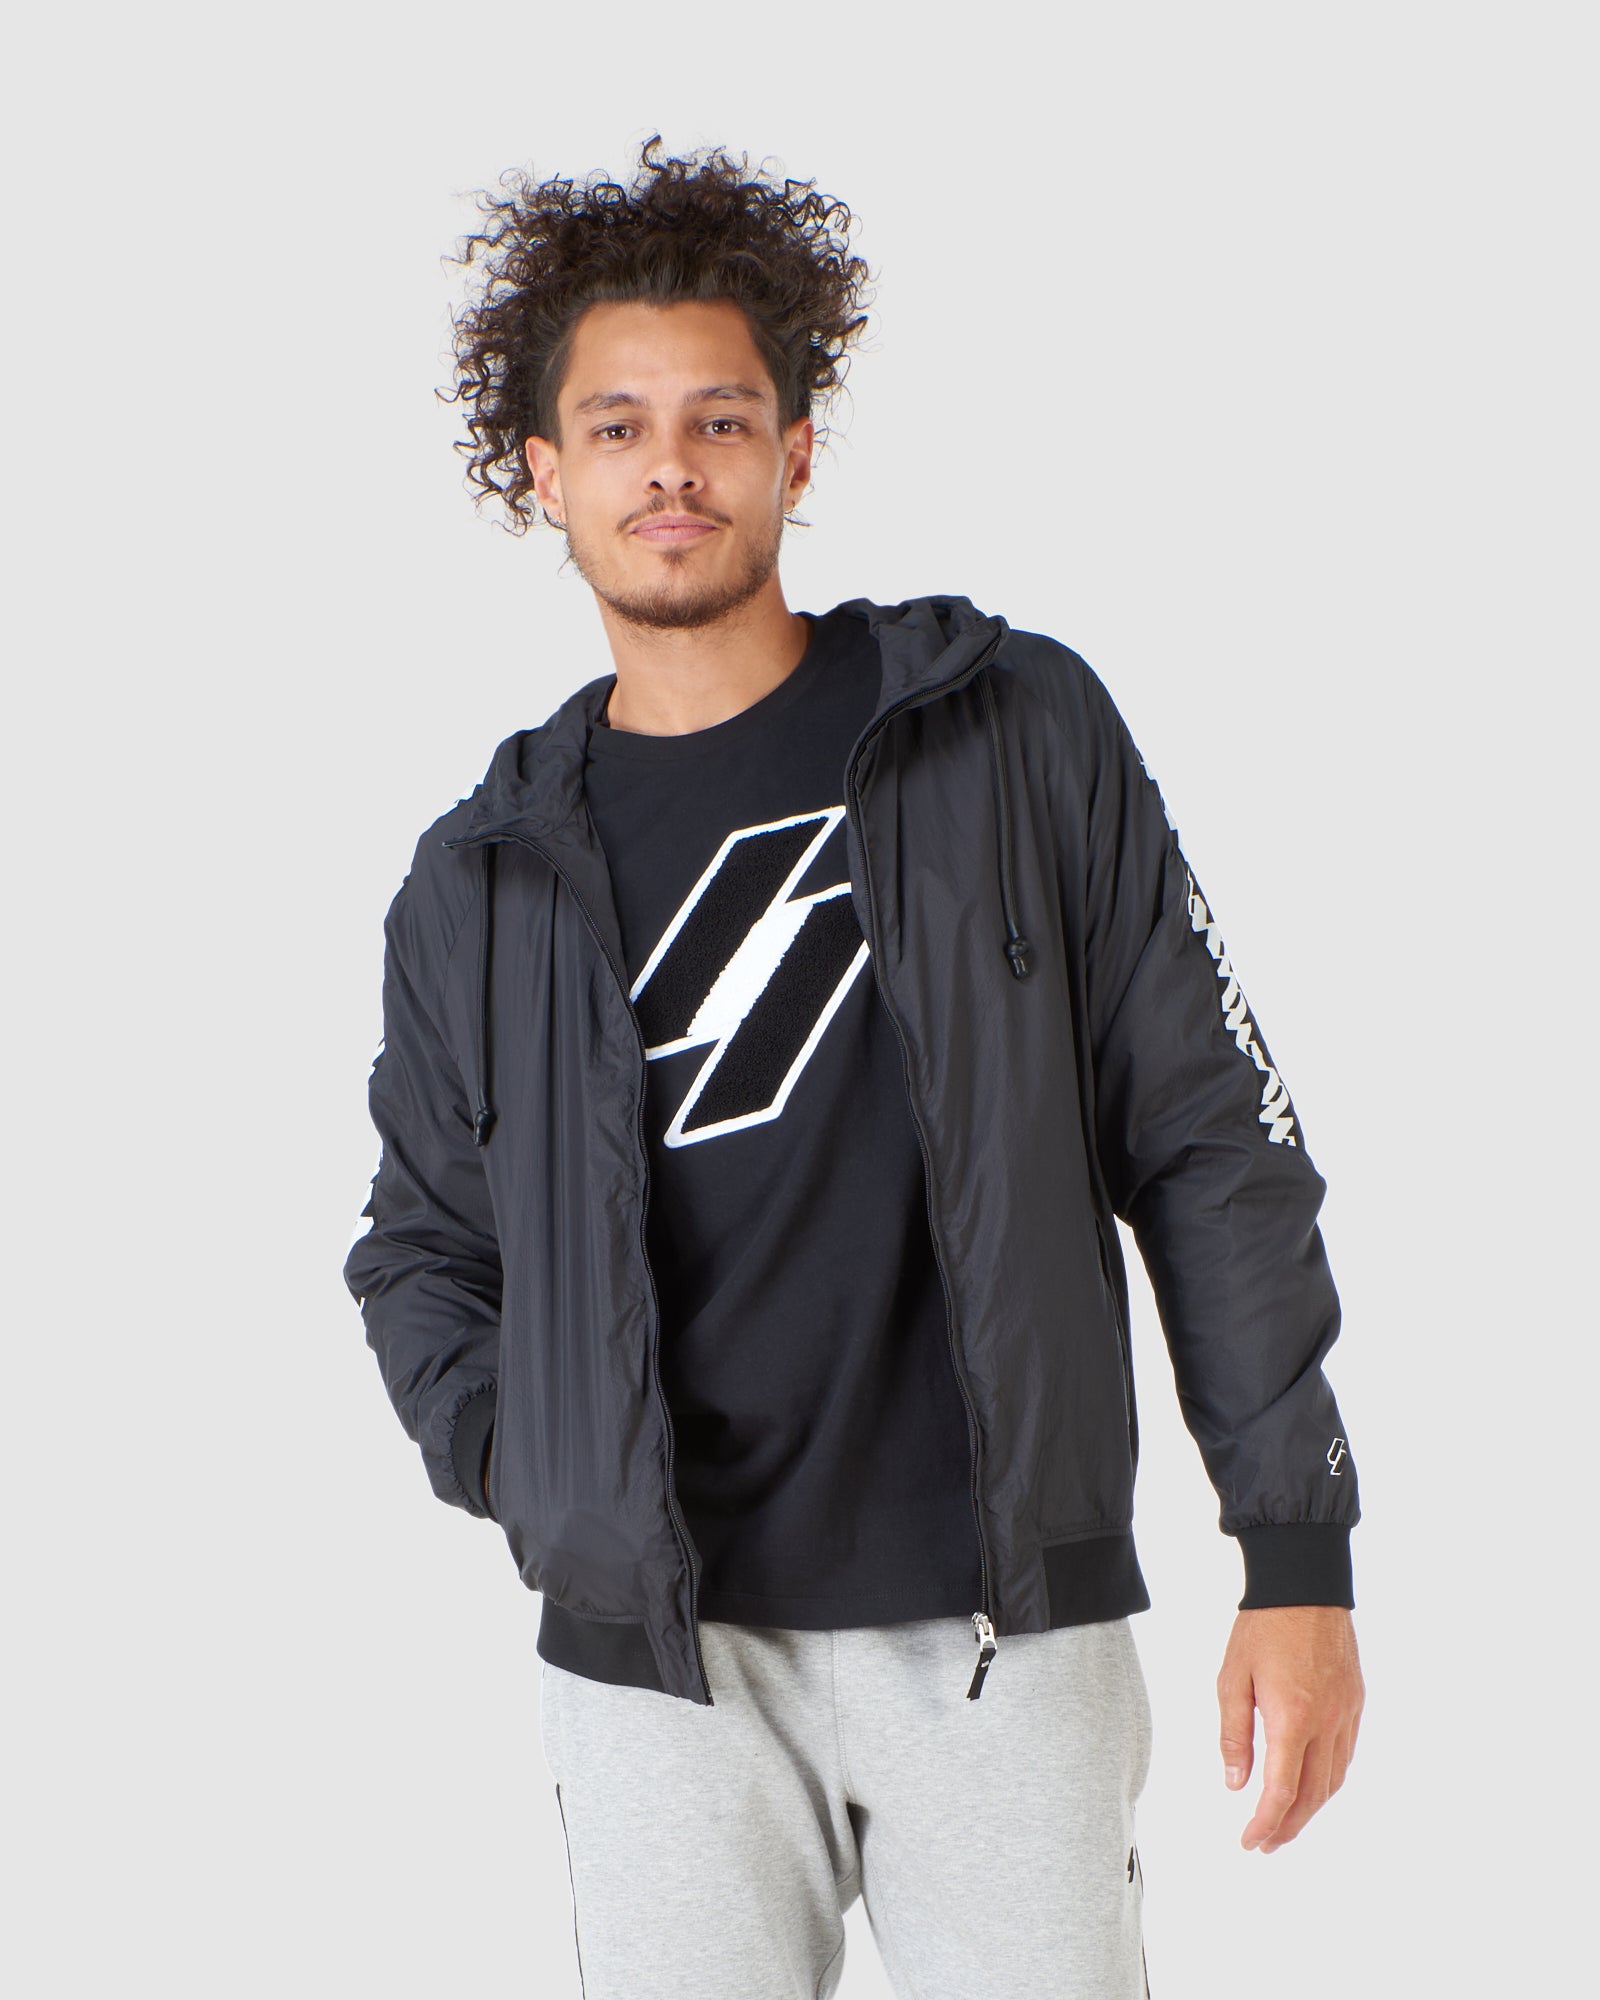 https://www.superdrymexico.com.mx/images/large/superdrymexico/Sudadera_Con_Capucha_Superdry_Vintage_Sc-LXE-791536_ZOOM.jpg